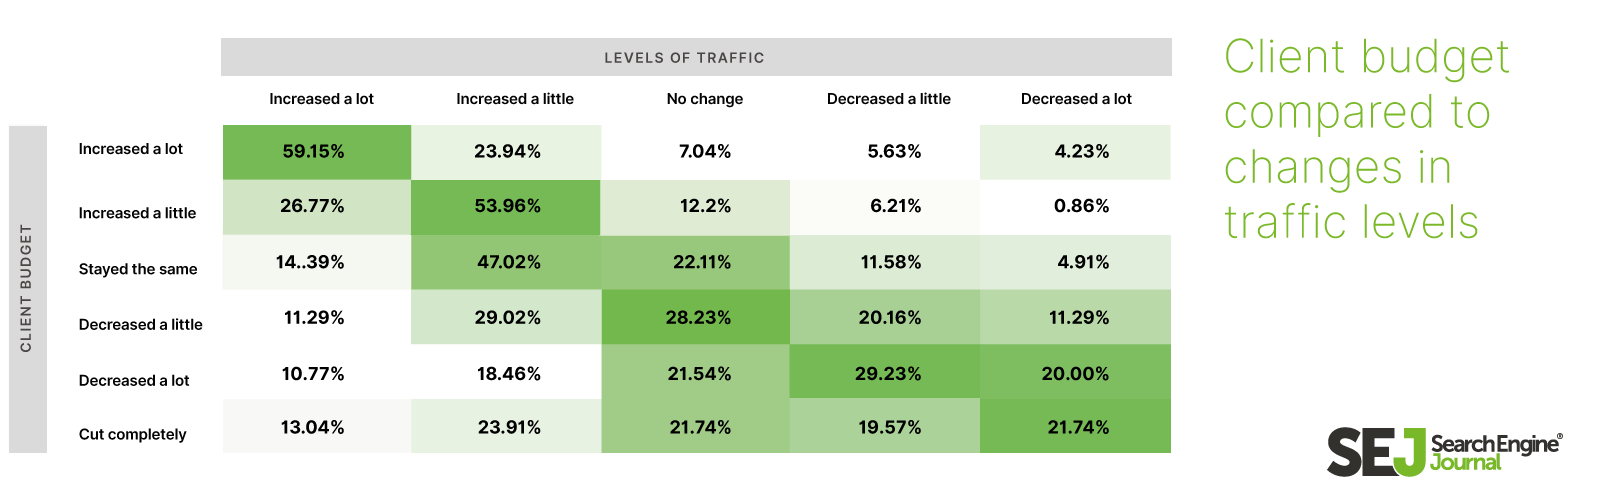 SEO Client budget compared to levels of traffic